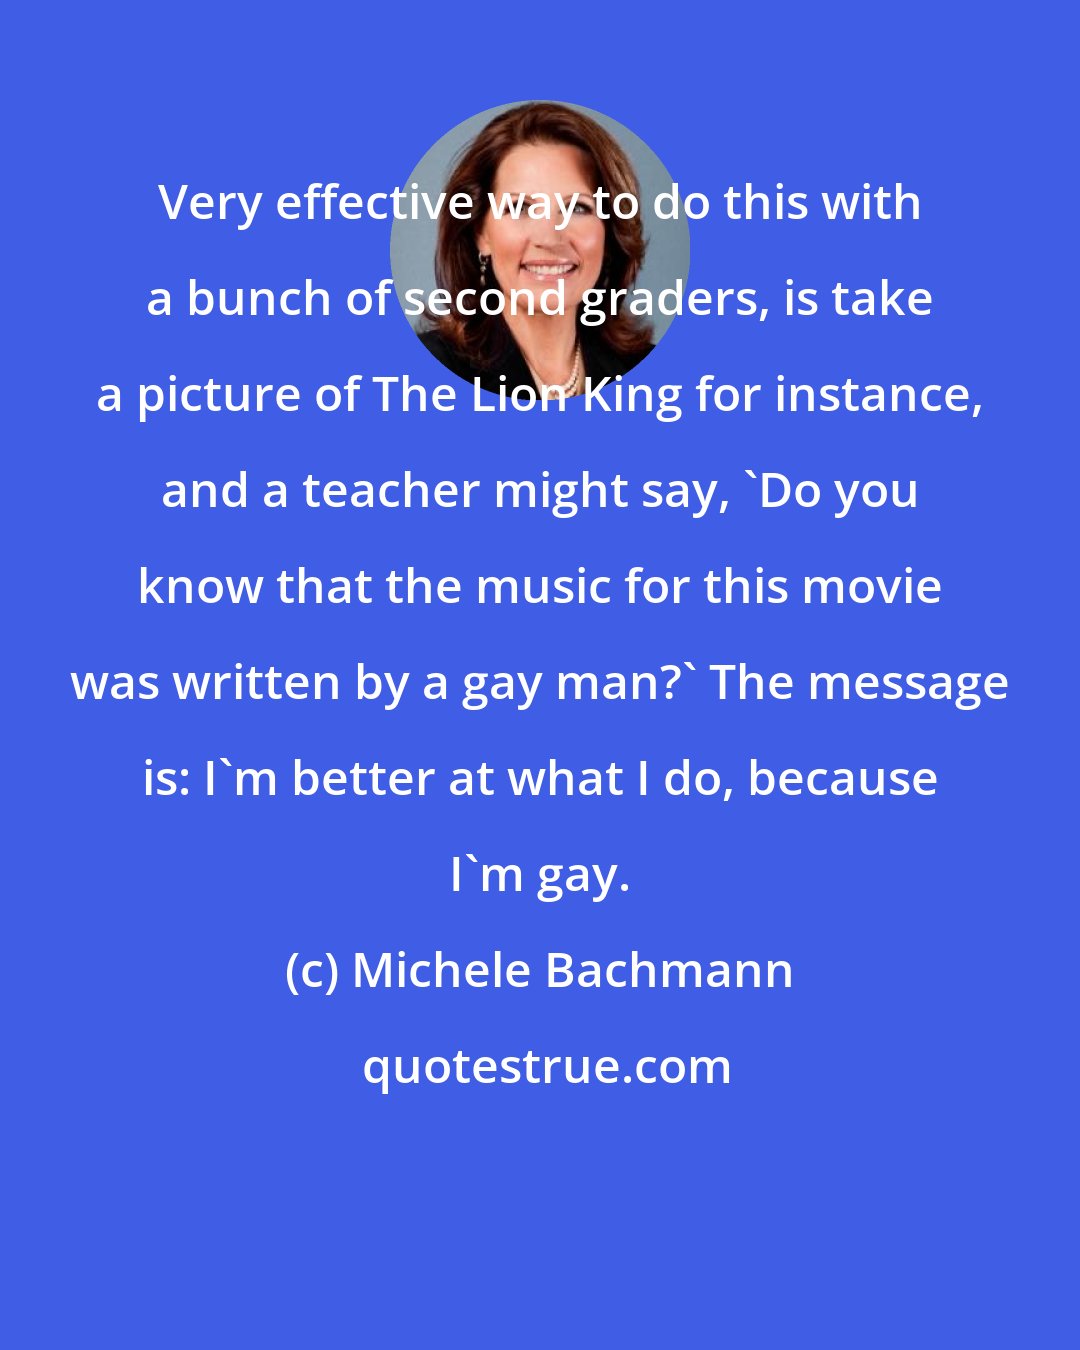 Michele Bachmann: Very effective way to do this with a bunch of second graders, is take a picture of The Lion King for instance, and a teacher might say, 'Do you know that the music for this movie was written by a gay man?' The message is: I'm better at what I do, because I'm gay.